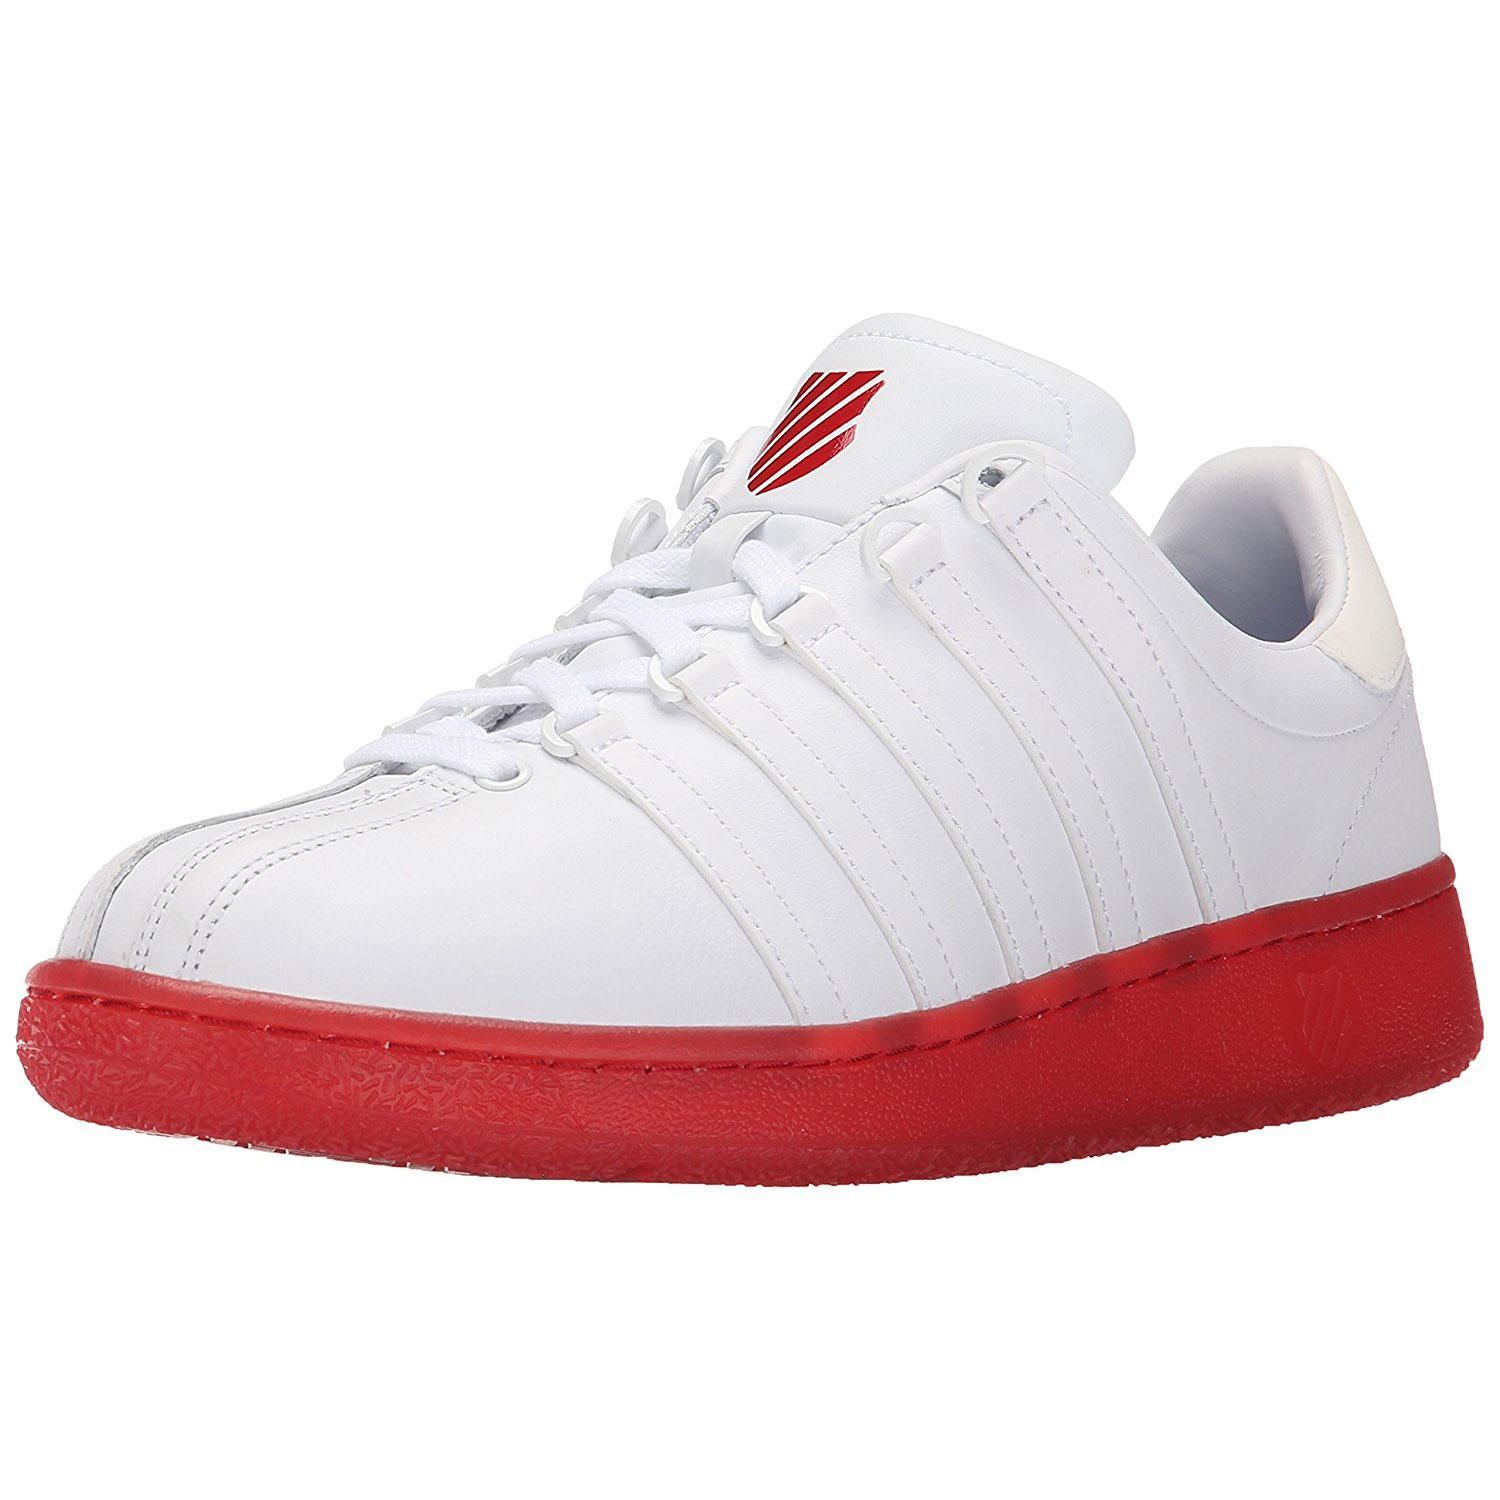 White with a Red K Logo - K Swiss Men's Classic VN Reflective Sneakers Ribbon Red